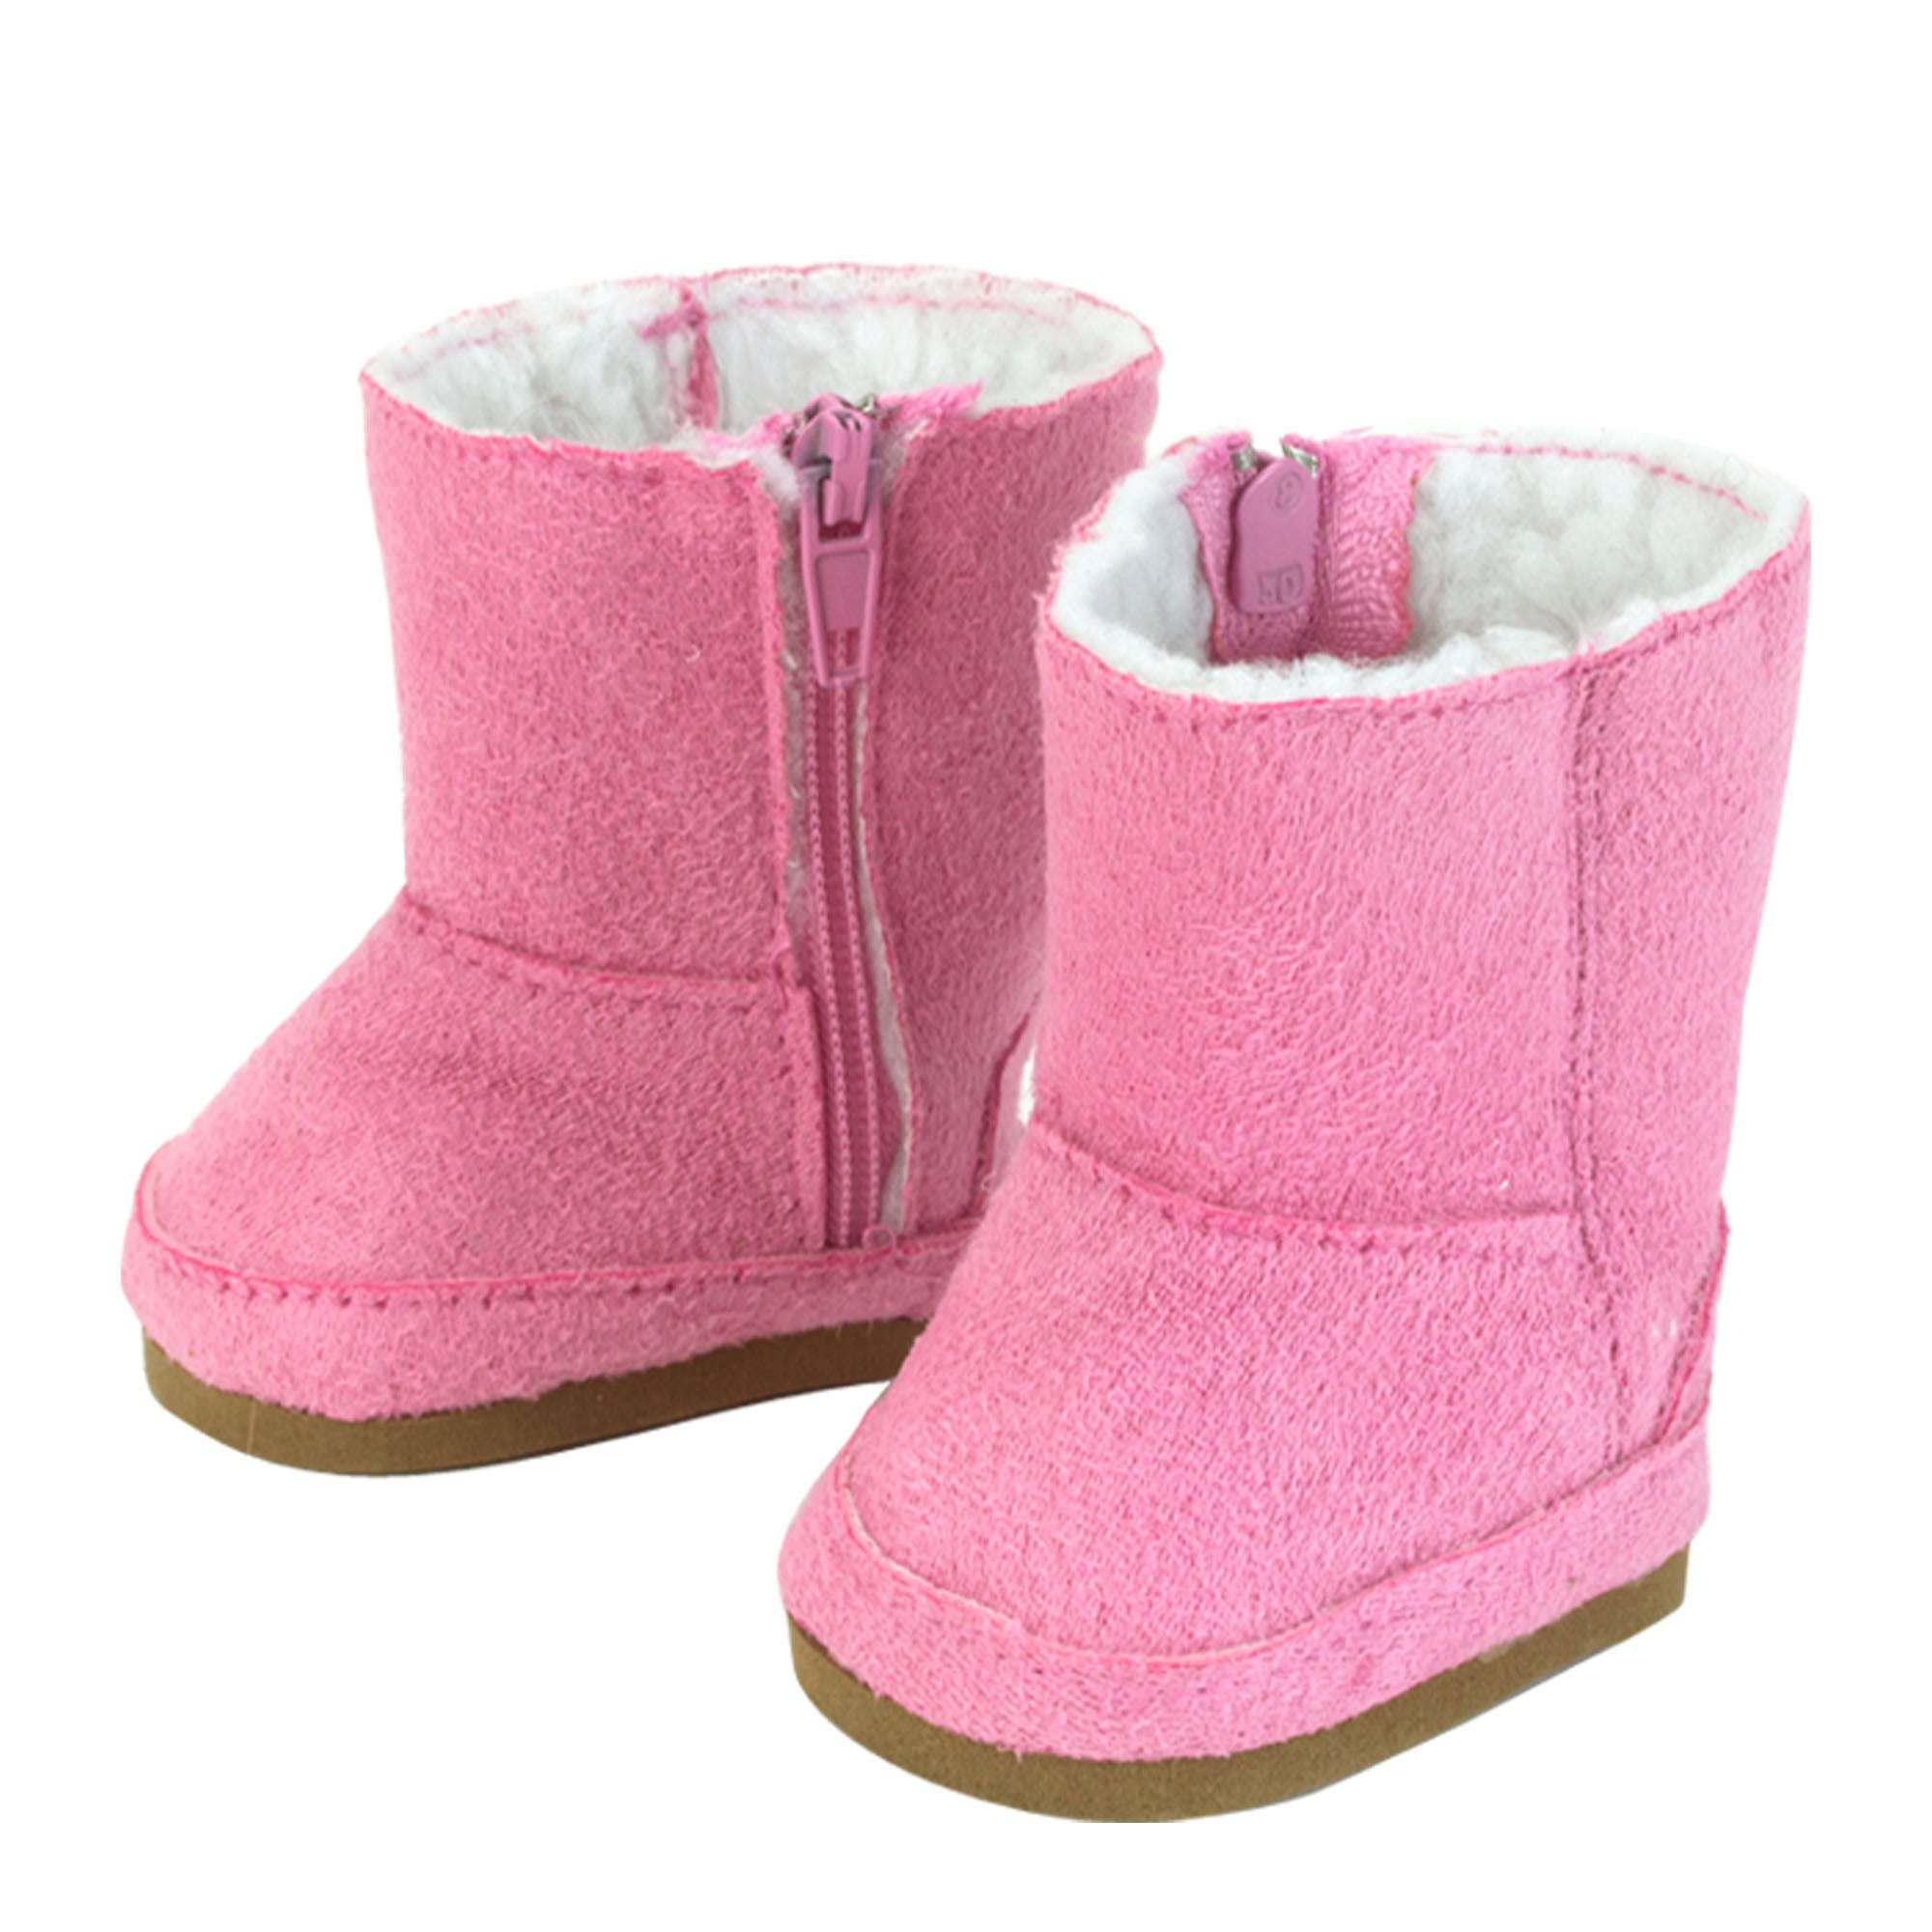 Sophia's Set of 3 Suede Winter Boots for 18" Dolls, Pink/Purple/Tan